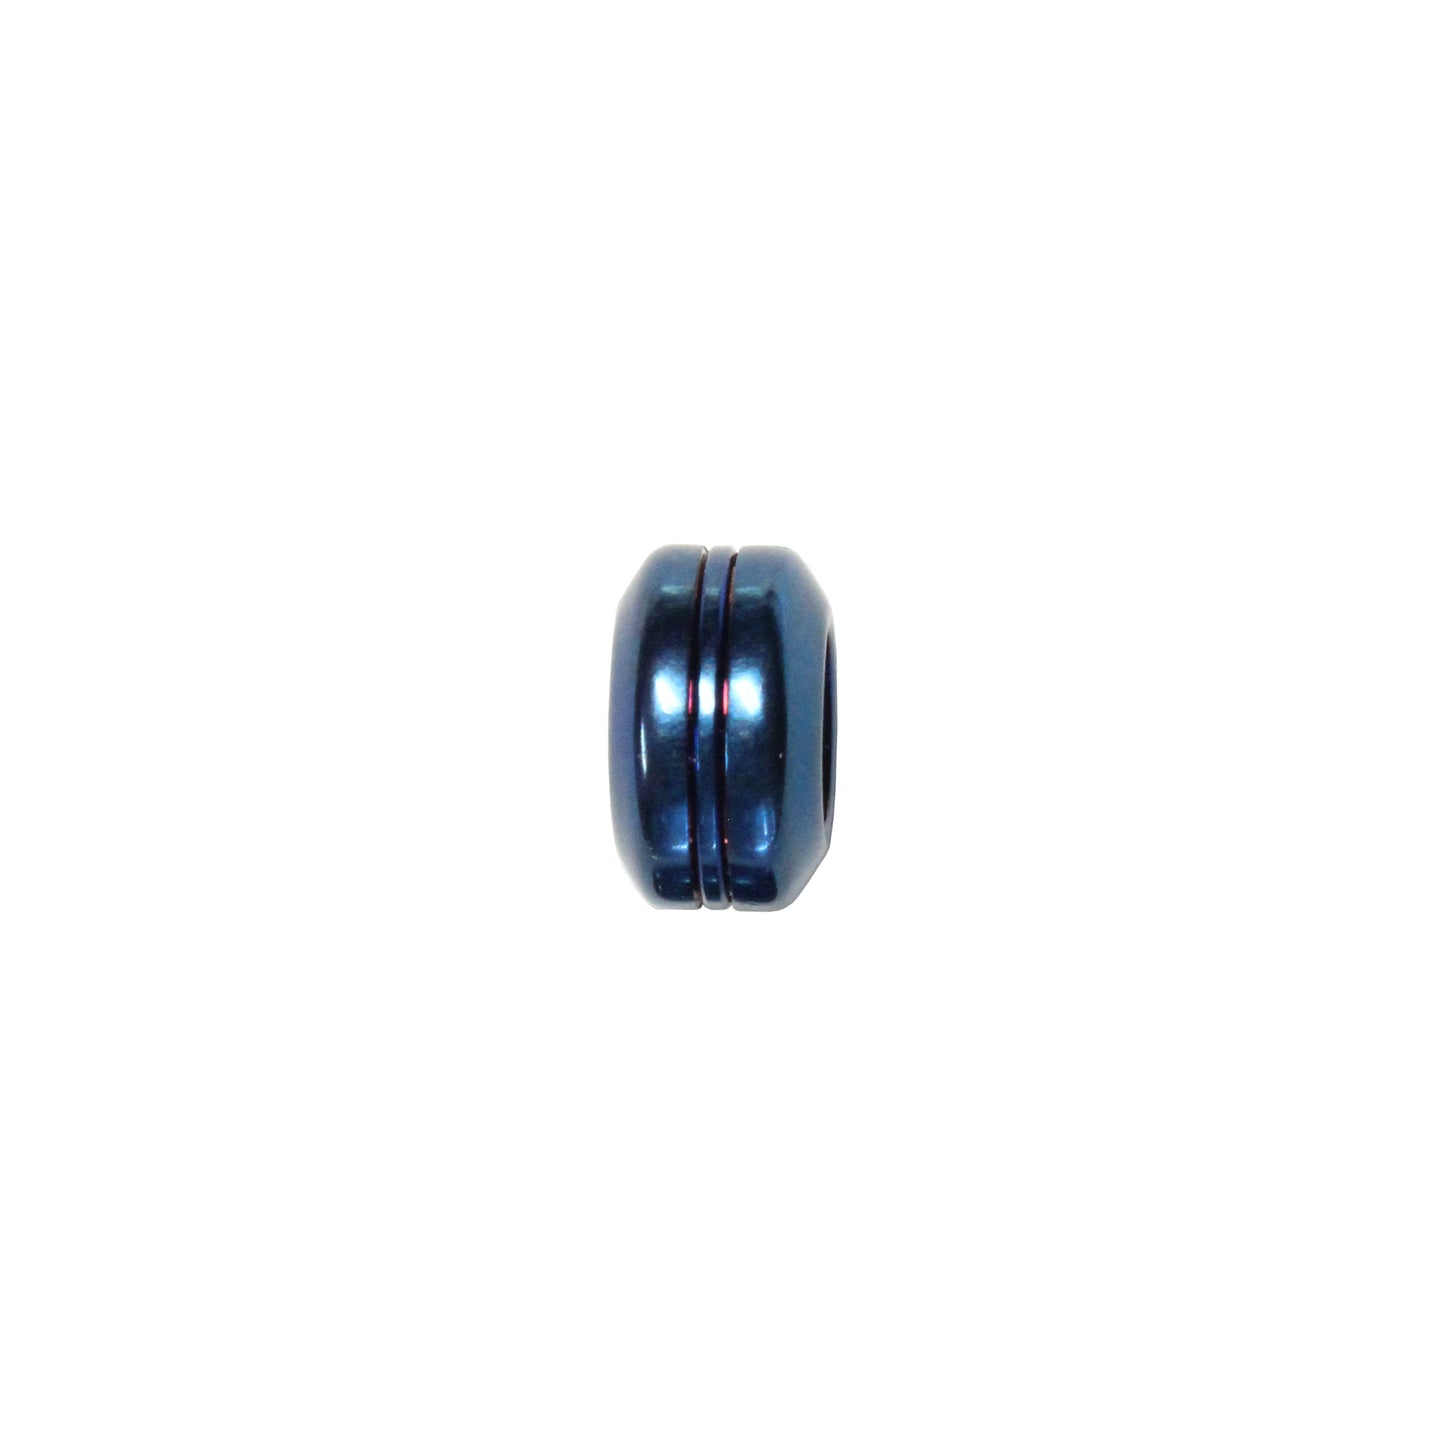 Ribbed Stainless Steel Spacer Bead / sold individually / blue color / 11 x 6.5 x 6mm ID / electroplated finish